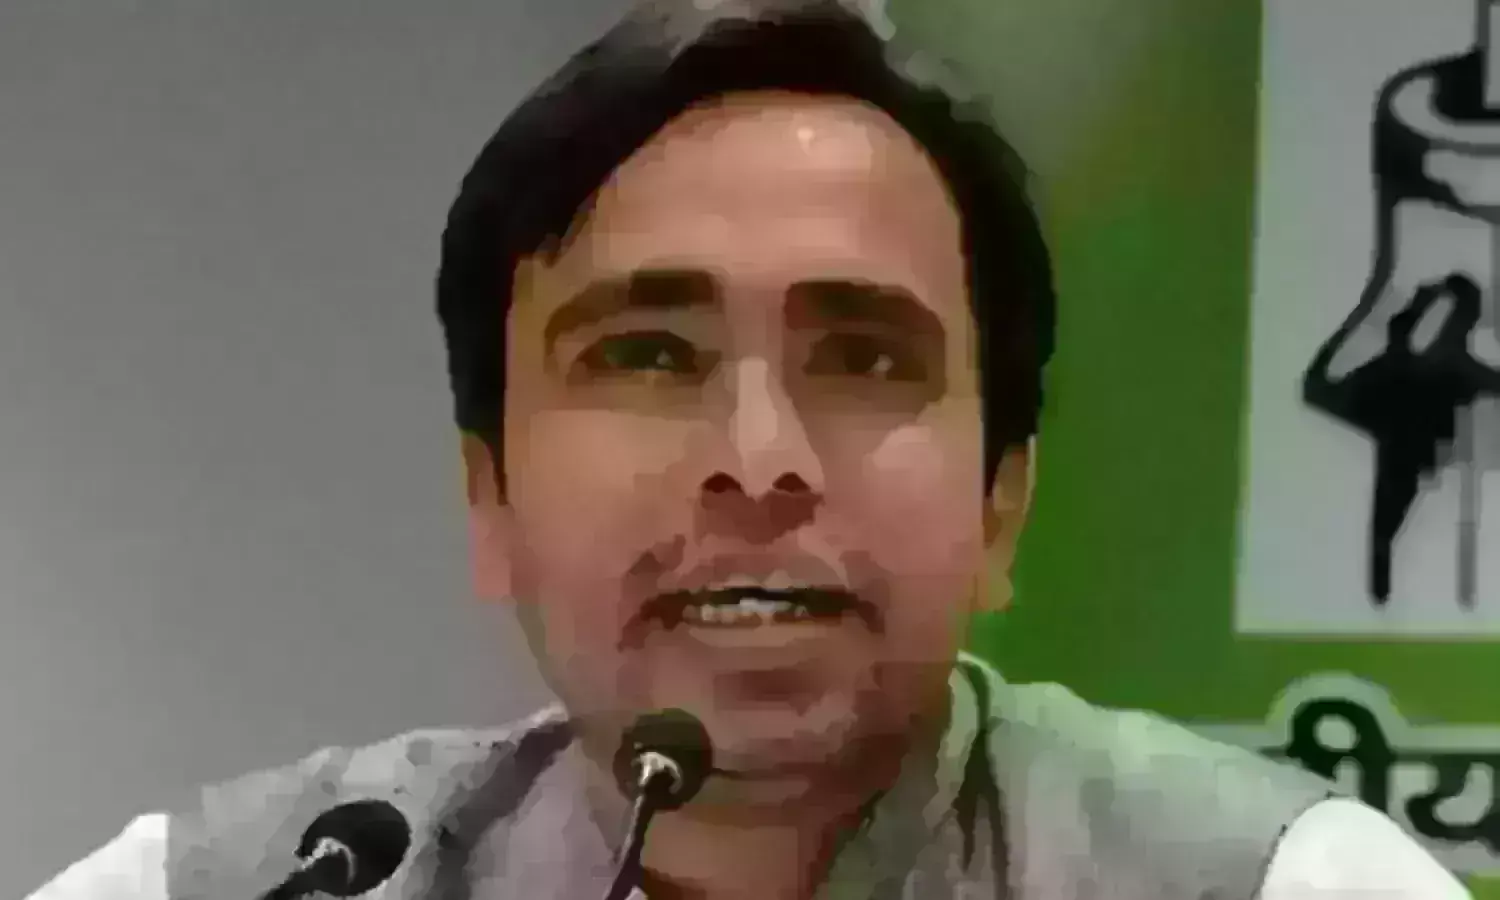 UP Election 2022 Exit Poll jayant chaudhary claims ELECTION results will be different sp rld alliance FORMED govt